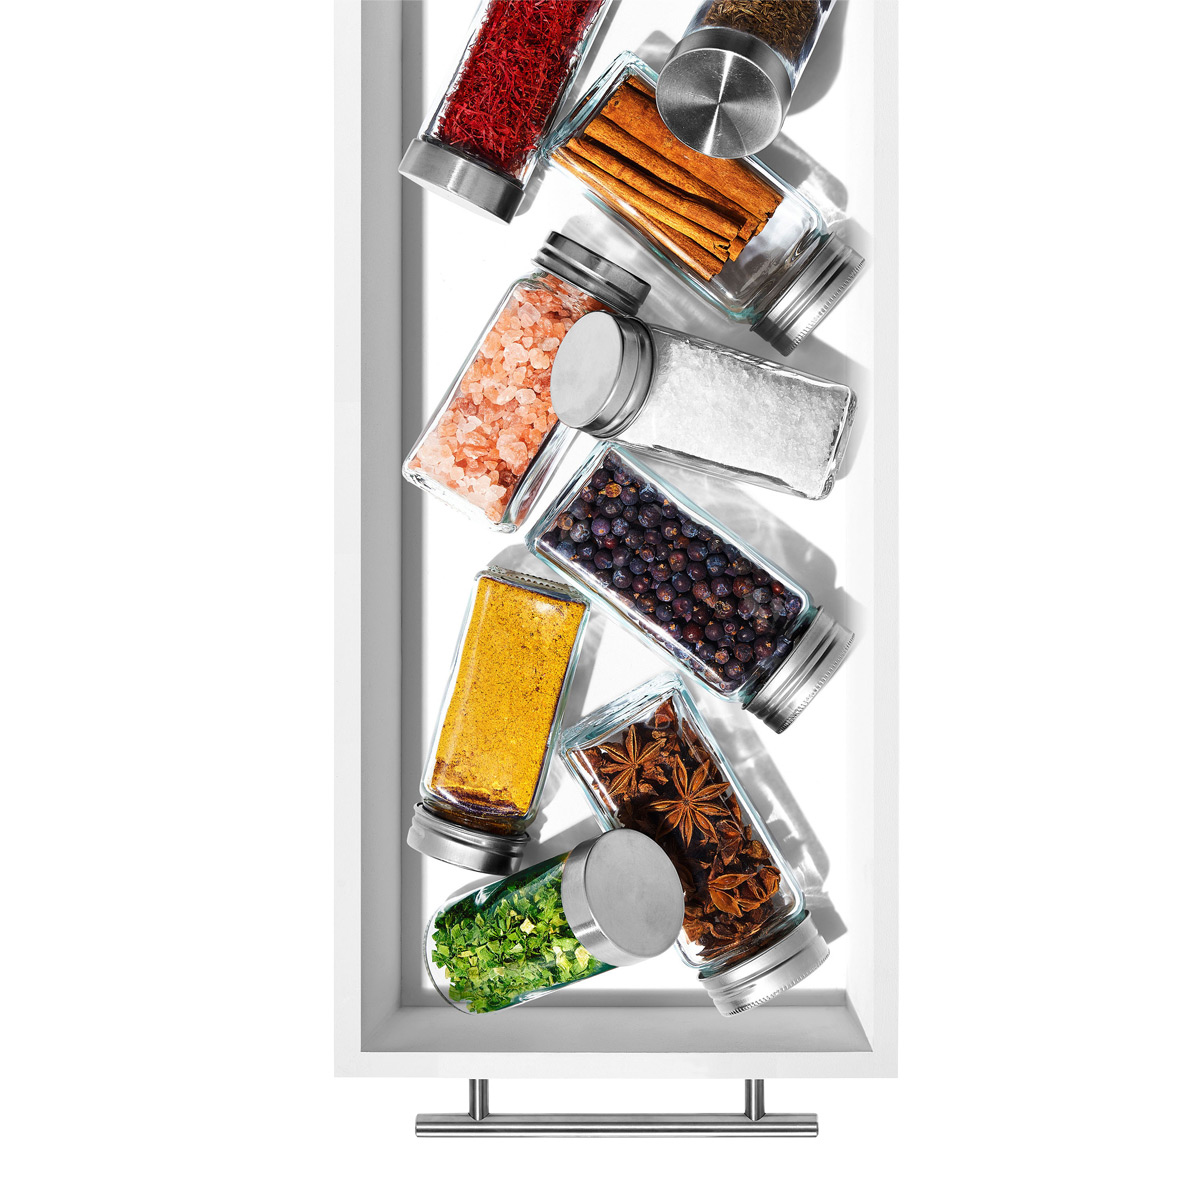 https://www.containerstore.com/catalogimages/443118/10088255-OXO-Compact-Spice-Drawer-Or.jpg